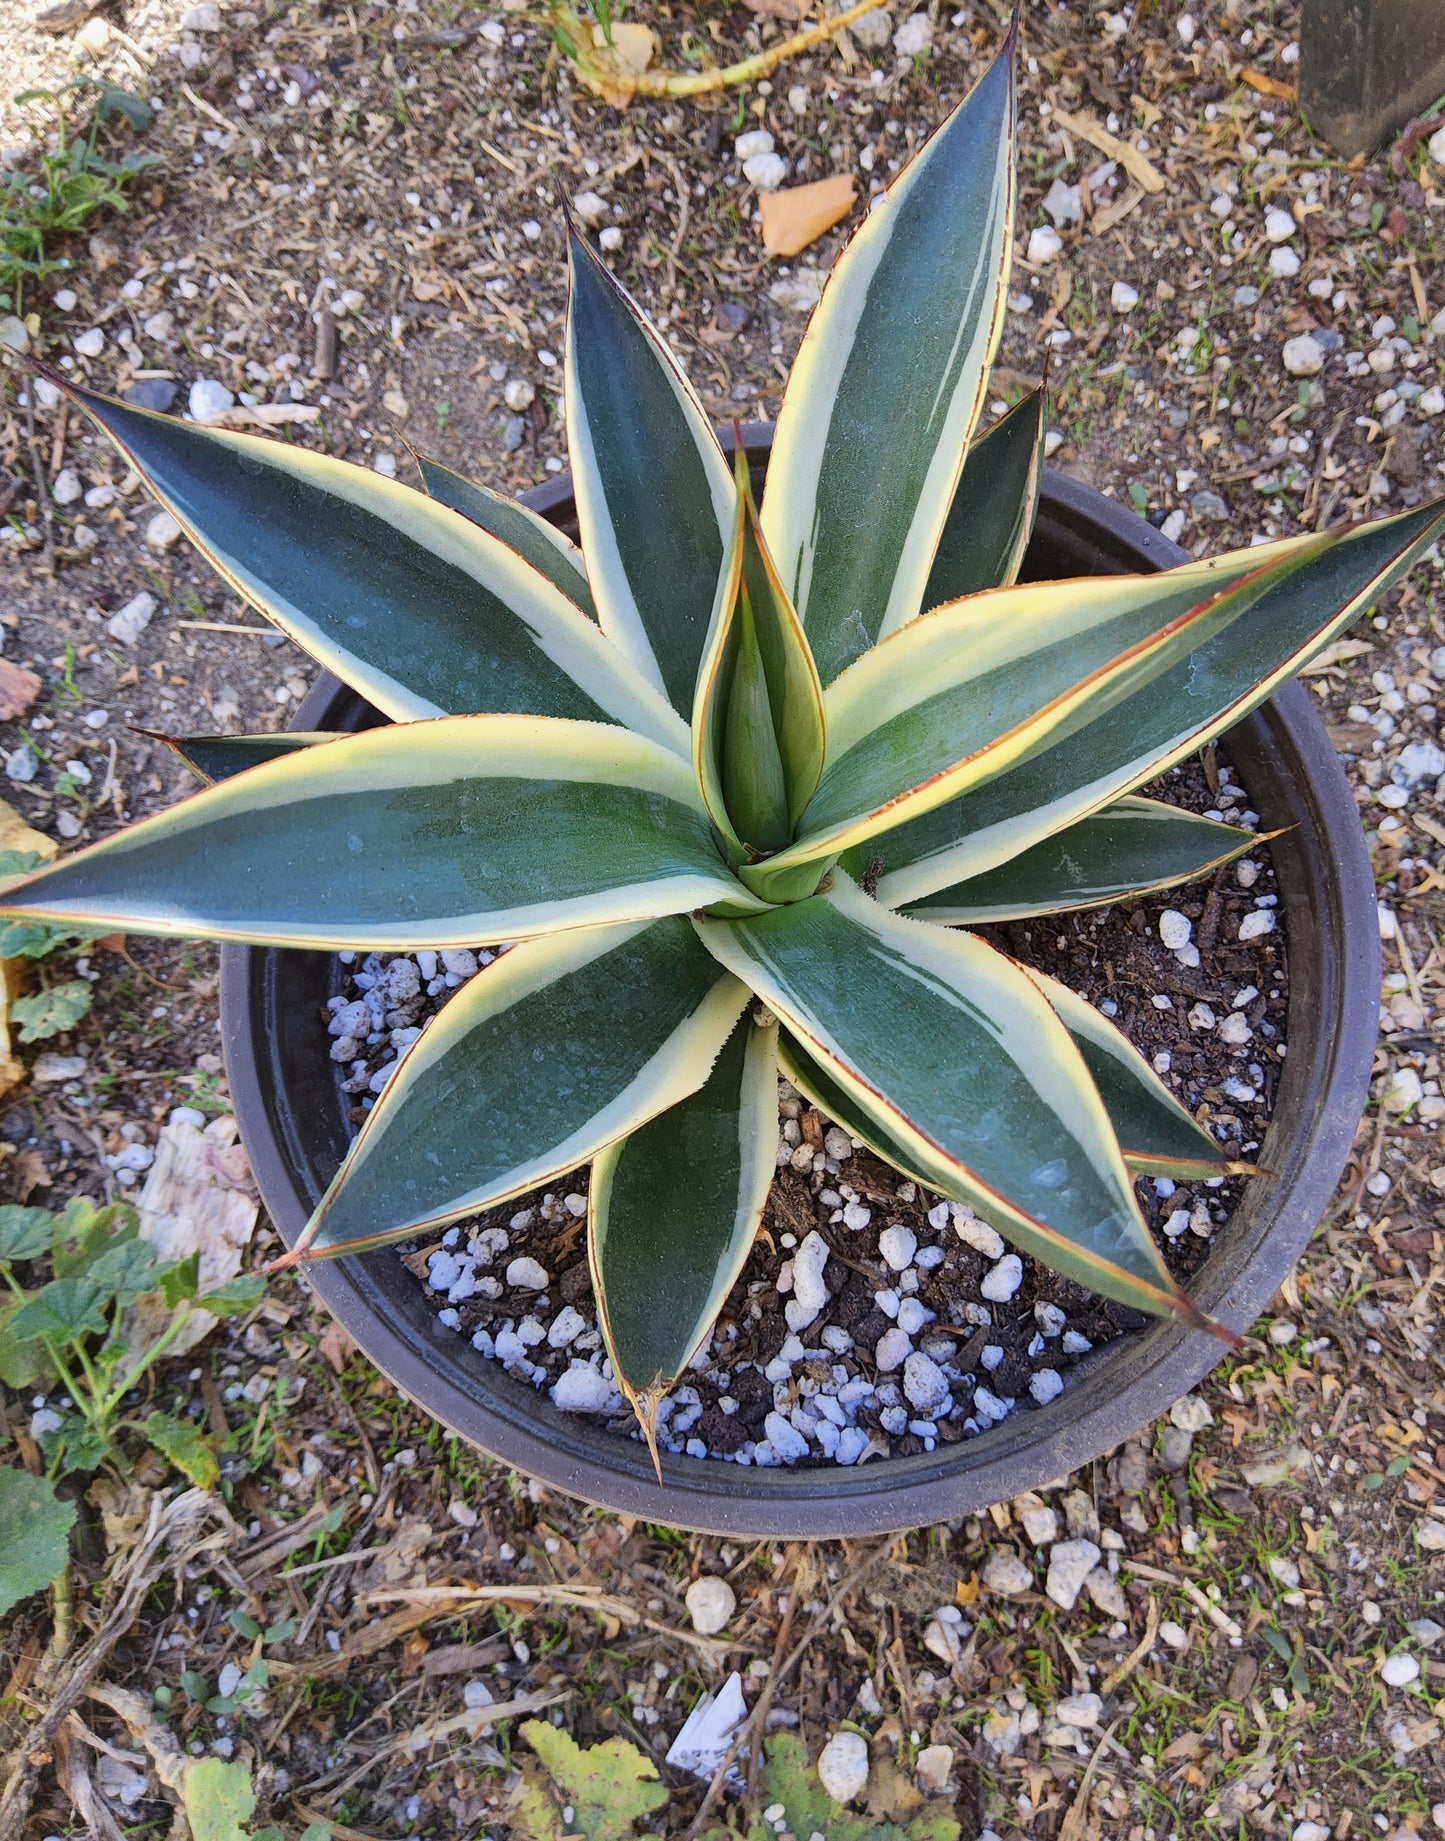 Agave 'Snow Glow' Live Succulent Growing in 6 Inch